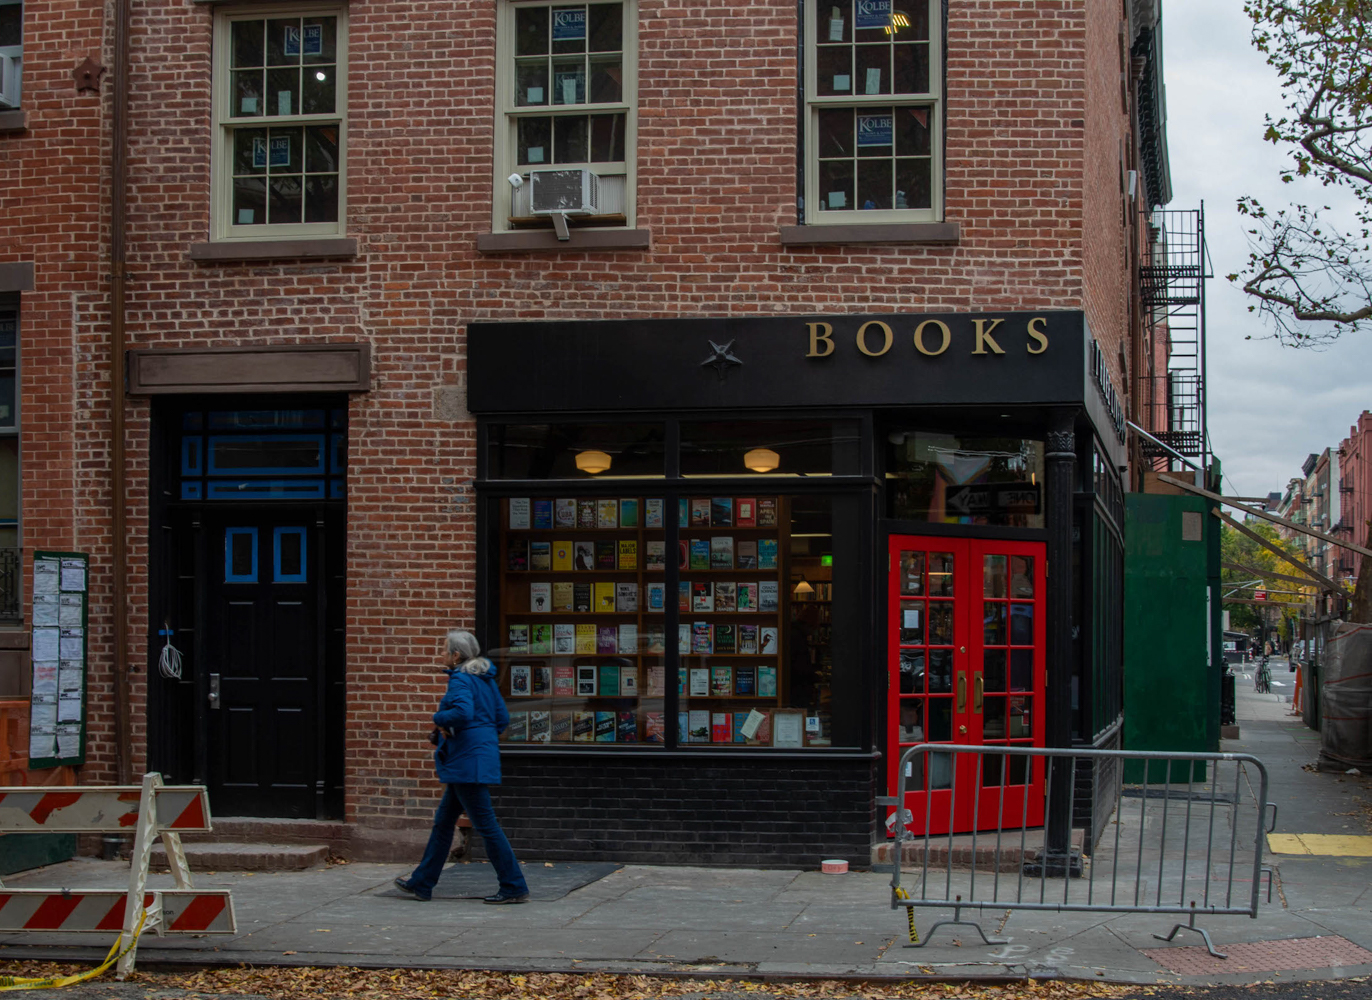 A person with long, gray hair is wearing blue jeans and a blue jacket while walking down the sidewalk. Behind them is the corner of Third Life Books with a bright red door and a window display of books. Construction equipment is on the sidewalk and street around them.